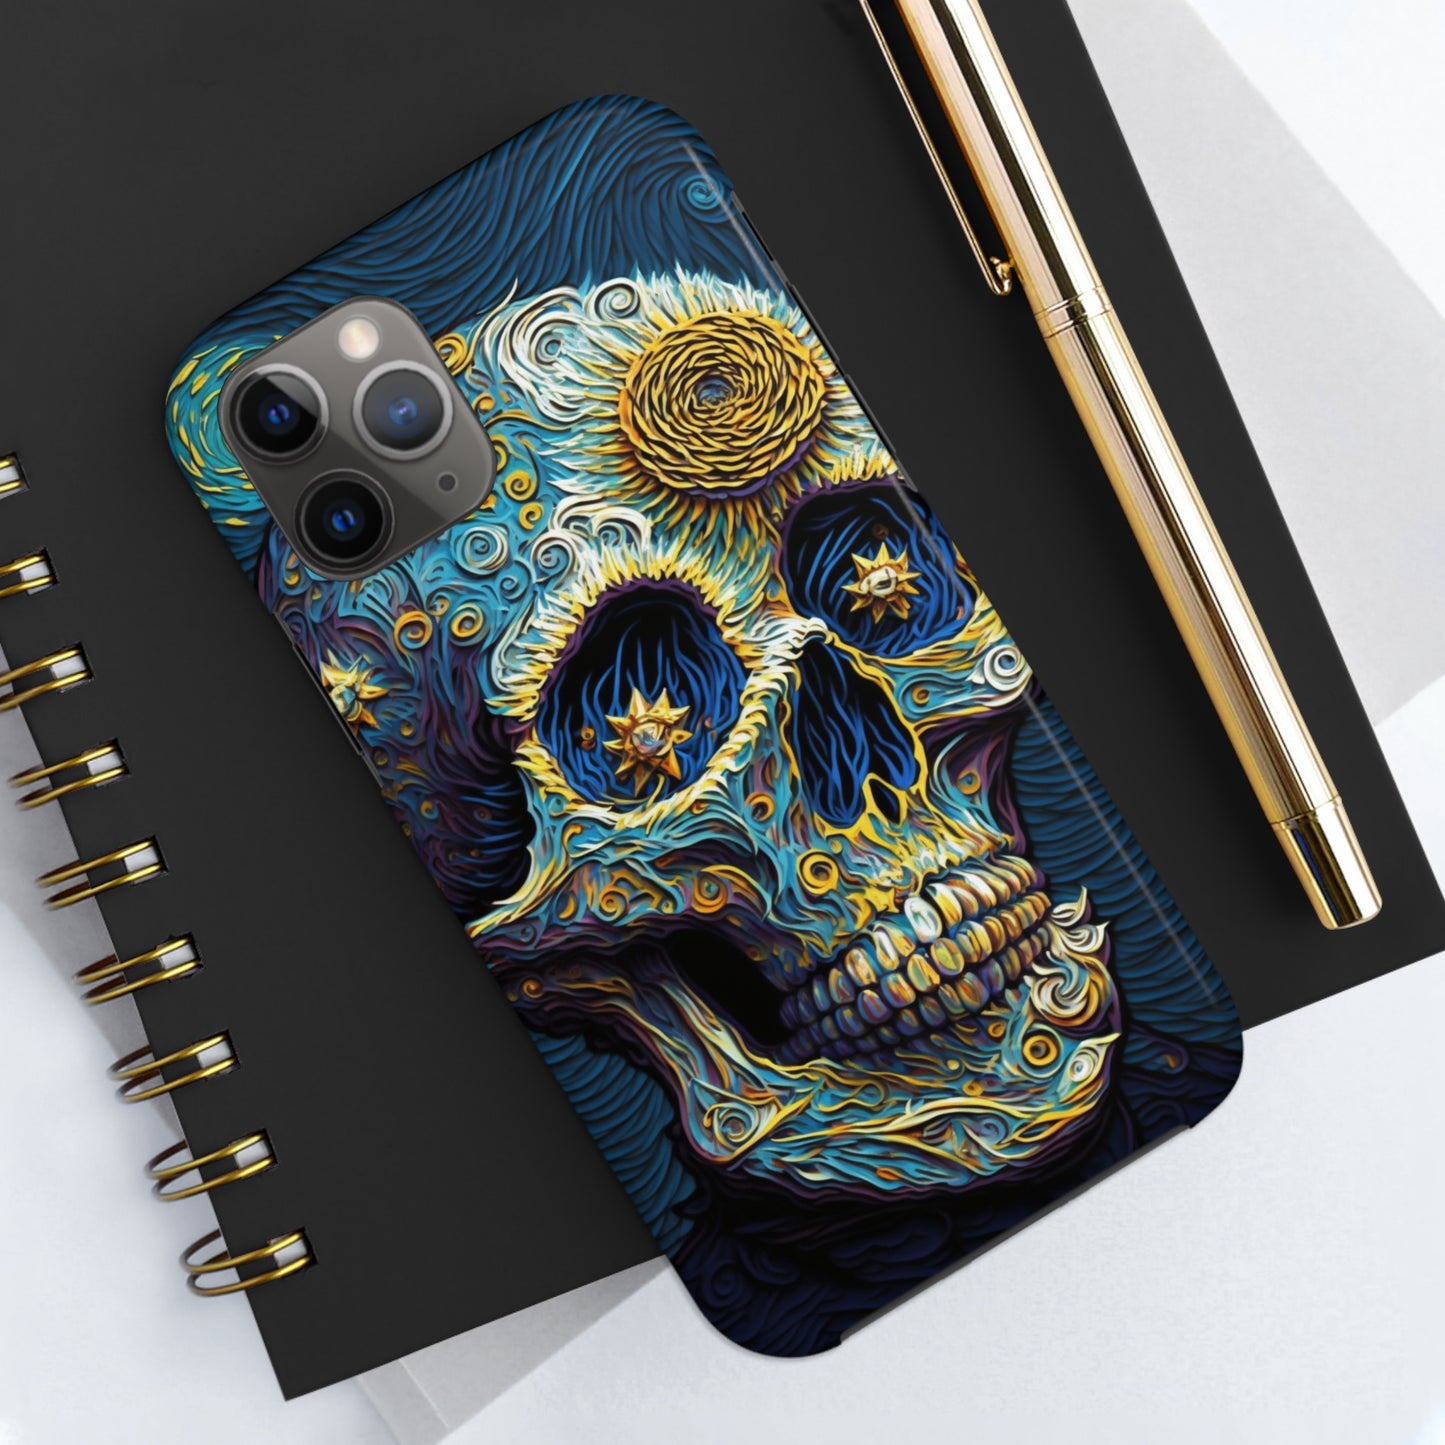 Artistic Fusion: Van Gogh-Inspired Sugar Skull Phone Case - Timeless Elegance Meets Cultural Iconography